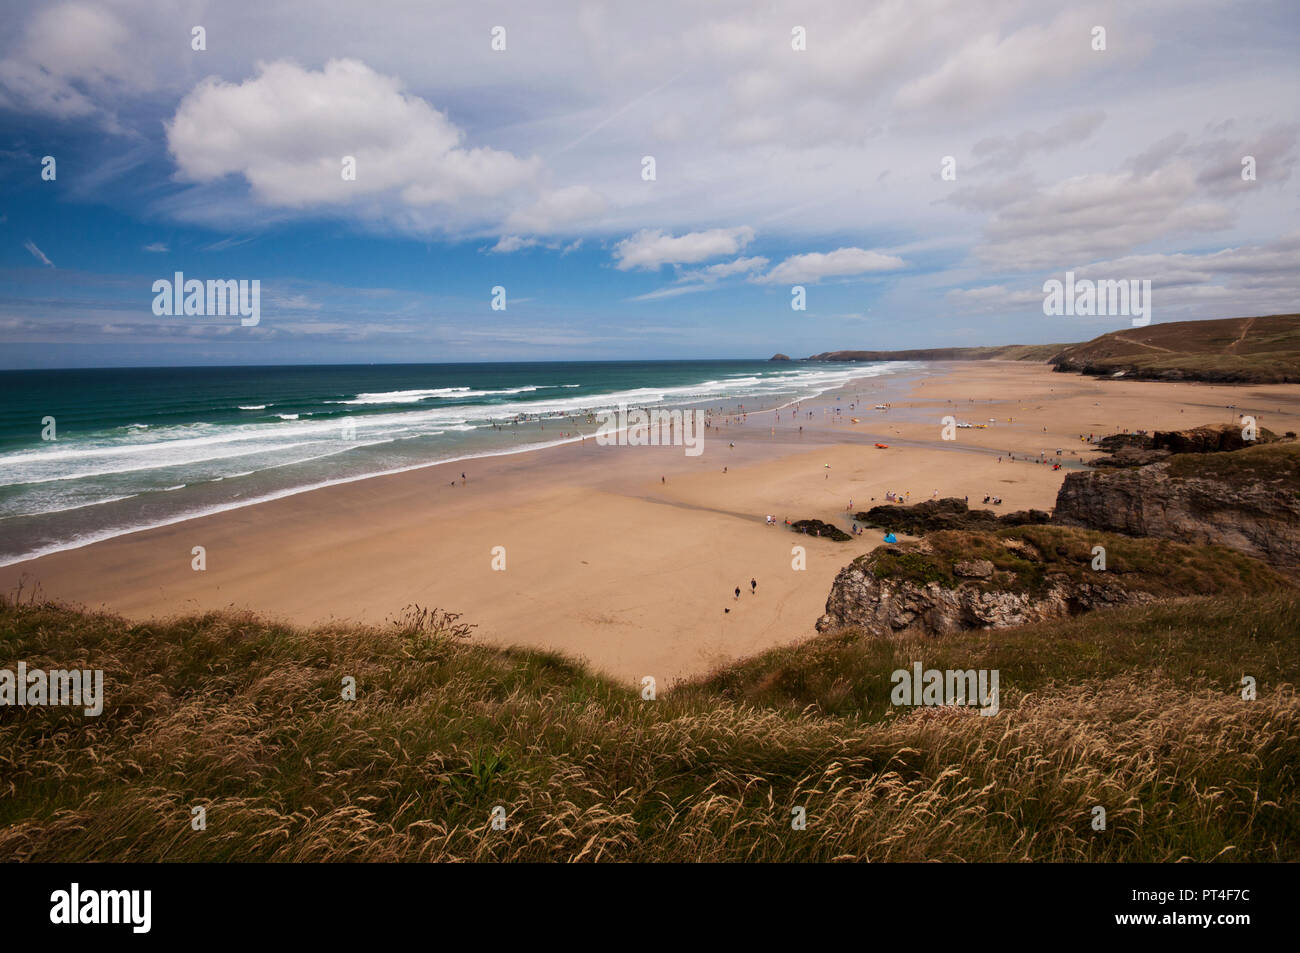 The beach at Perranporth in Cornwall, England UK Stock Photo